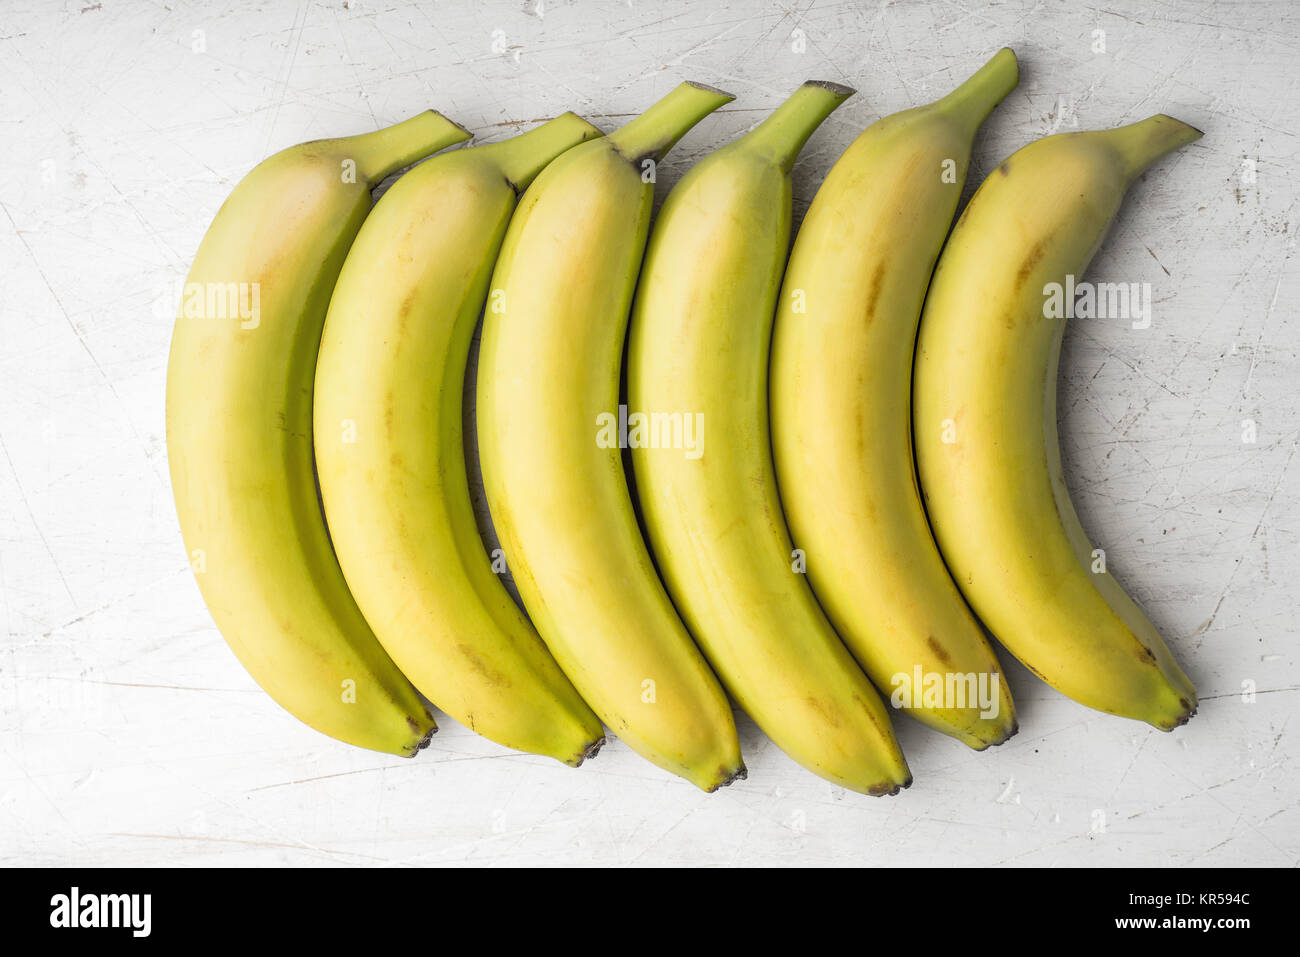 Yellow bananas are laid out in a rectangle Stock Photo